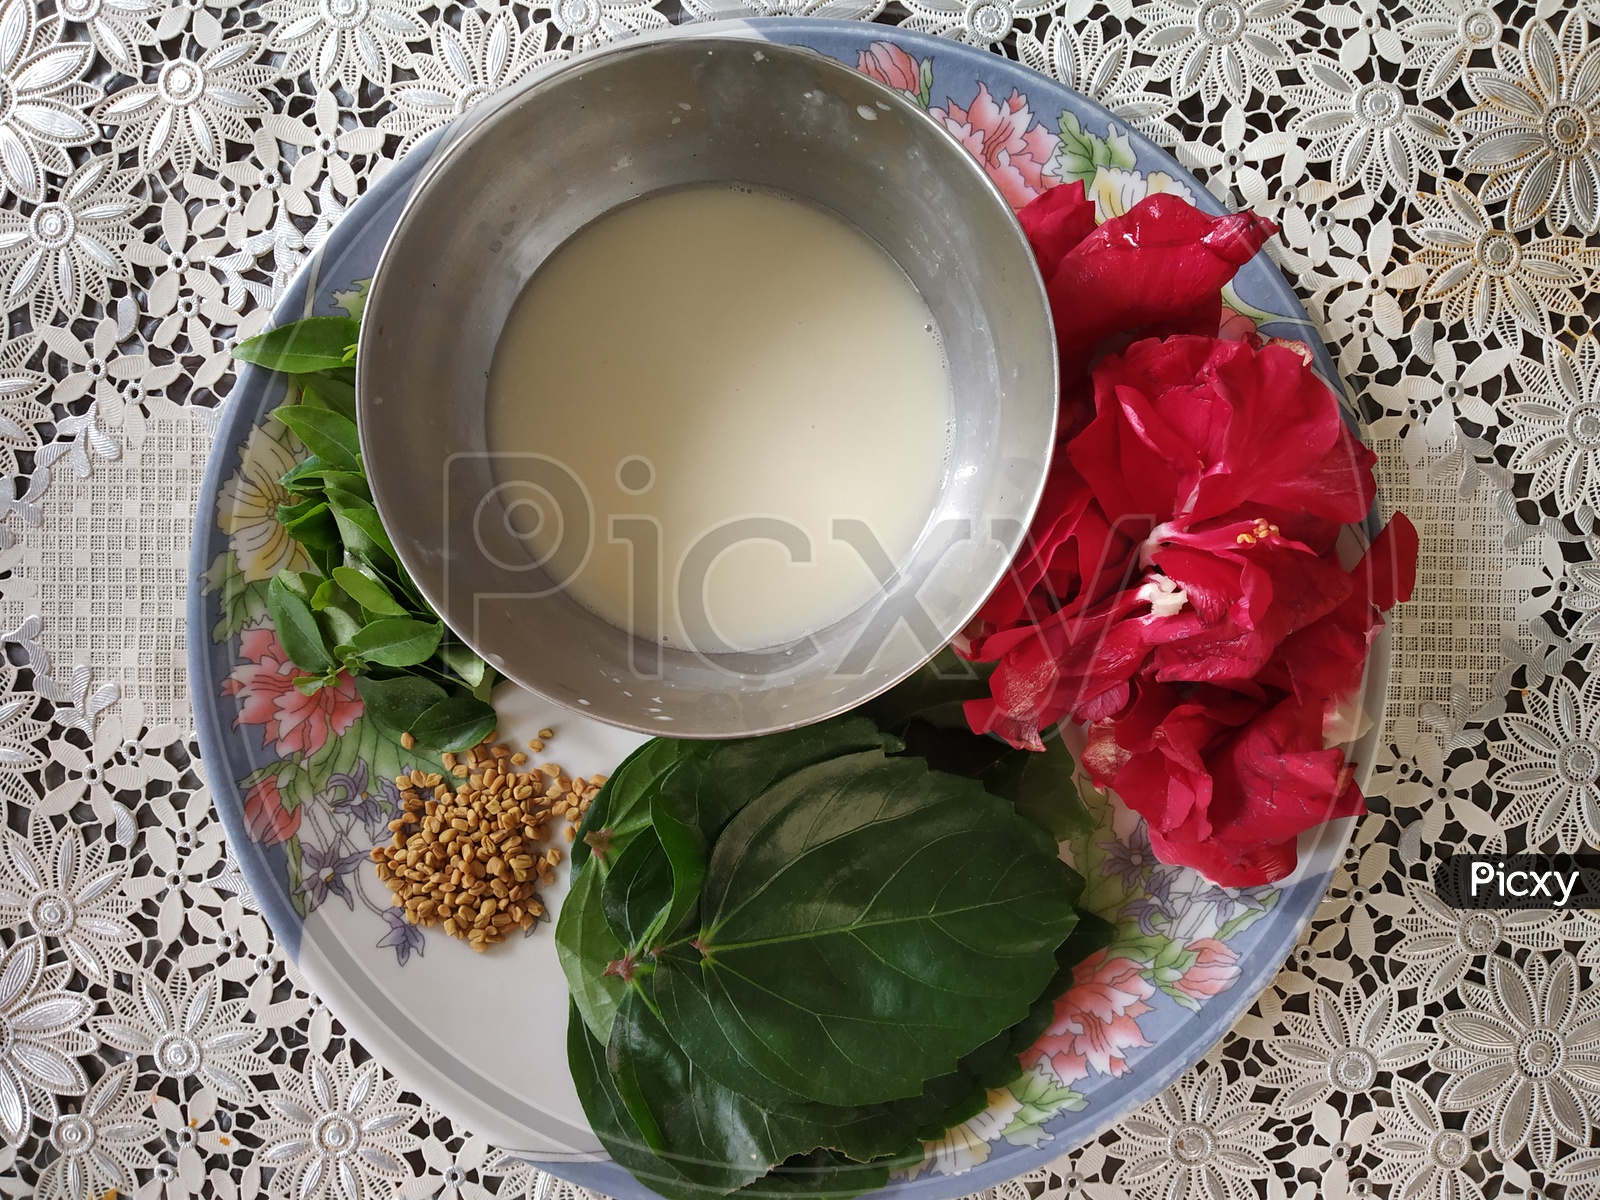 Hair pack Ingredients - Hibiscus leaves and flowers, menthi seeds, alla juice and curry leaves